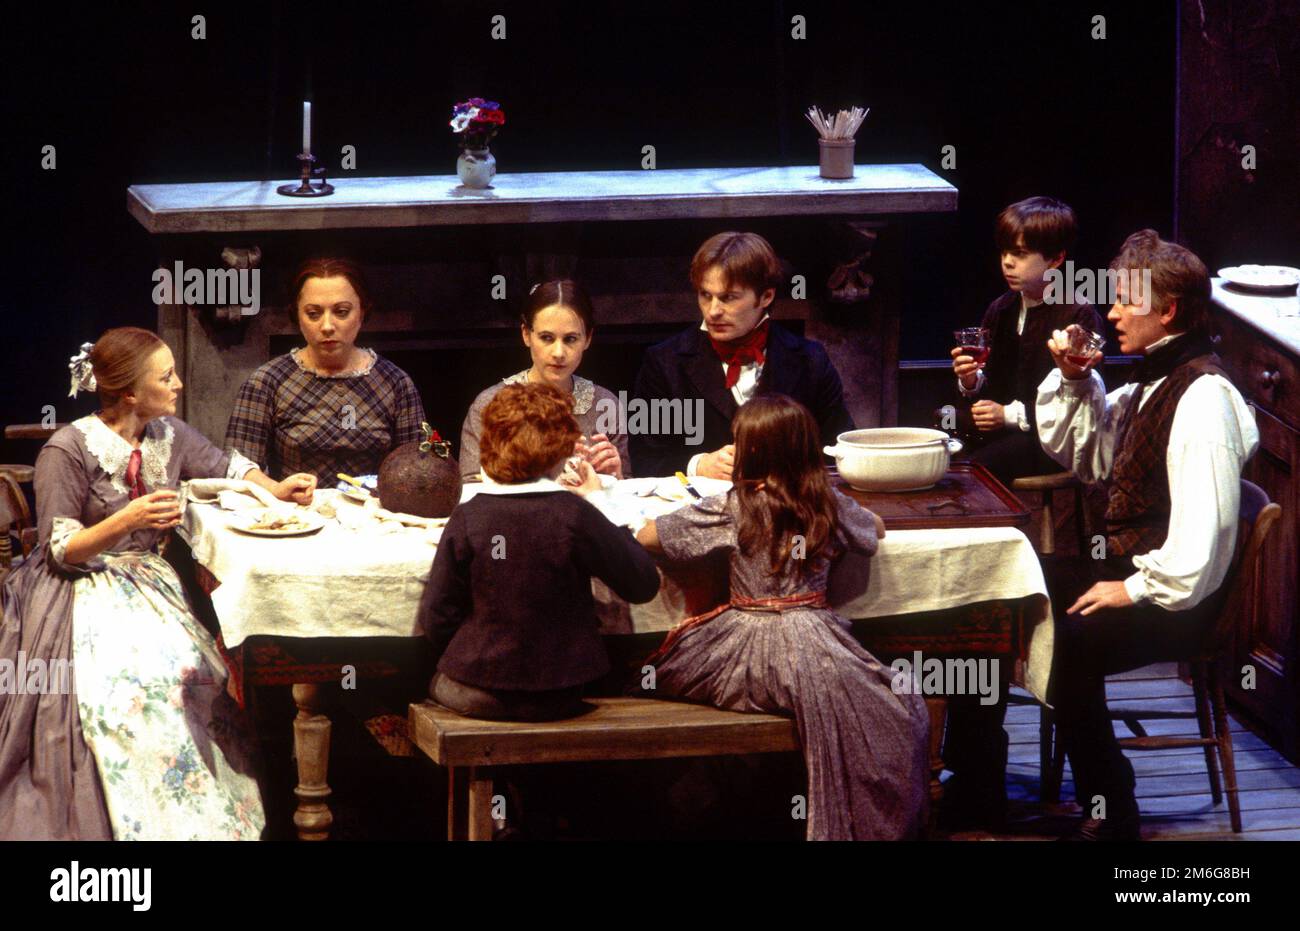 the Cratchit Christmas dinner, l-r: Polly James (Mrs Cratchit), Sara Weymouth (Martha), Vicky Blake (Belinda), Roger Moss (Peter), Steven Geller (Tiny Tim), Paul Greenwood (Bob Cratchit) in A CHRISTMAS CAROL by Charles Dickens at the Royal Shakespeare Company (RSC), Barbican Theatre, Barbican Centre, London EC2  28/11/1994   adapted by John Mortimer  music: Nigel Hess  set design: John Gunter  costumes: Deirdre Clancy  lighting: Nigel Levings  choreography: Lindsay Dolan  director: Ian Judge Stock Photo